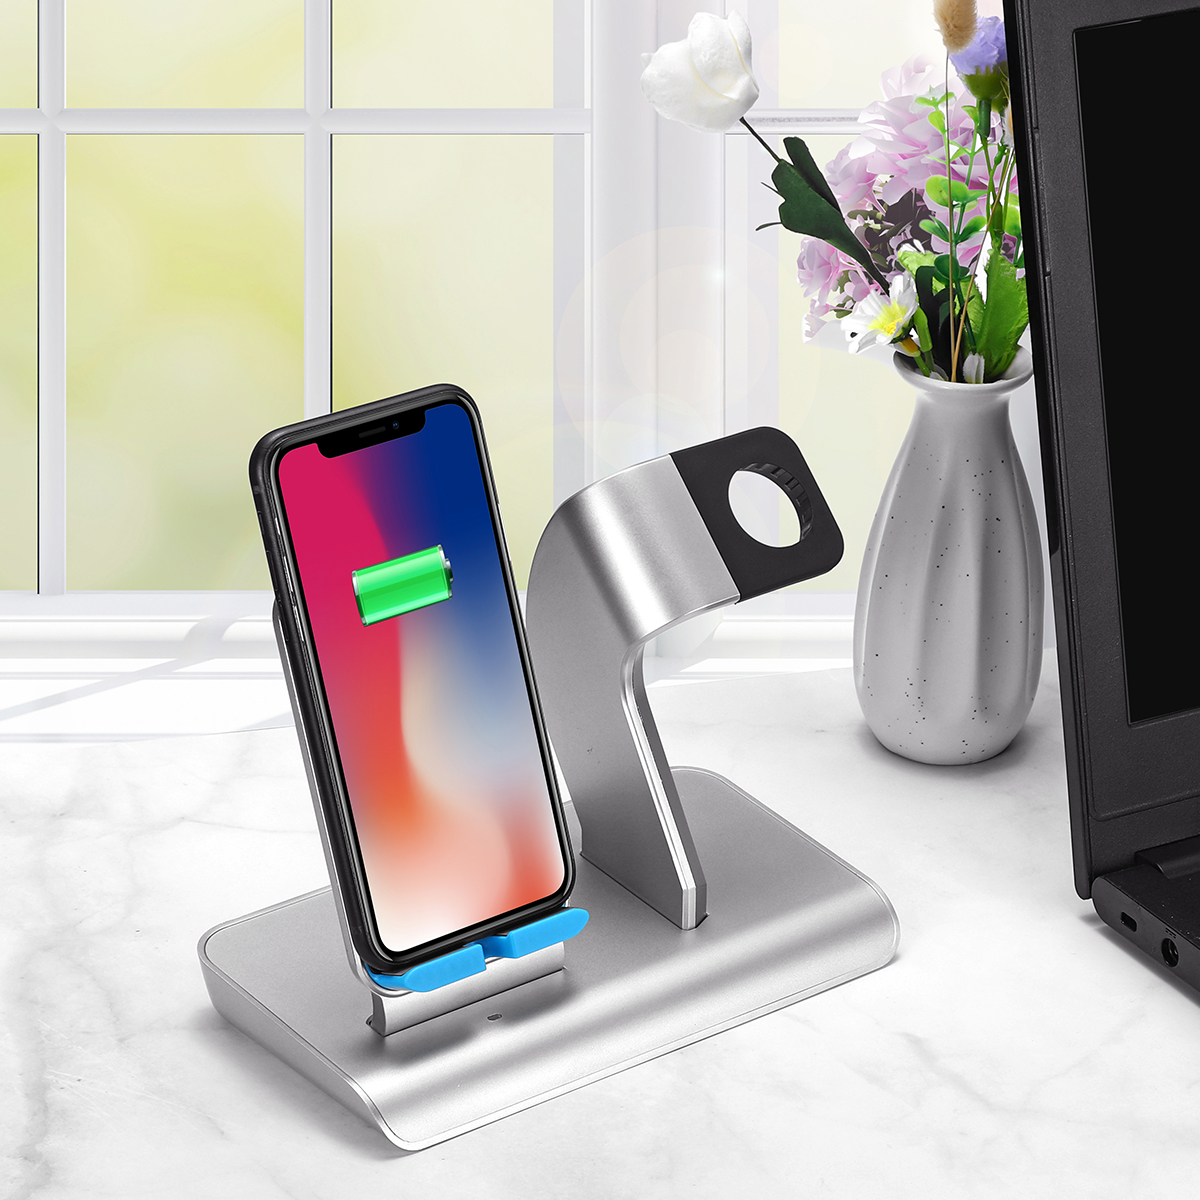 10W-2-In-1-Qi-Wireless-Charger-Fast-Charging-Phone-Watch-Holder-For-iPhone-Samsung-Huawei-Apple-Watc-1416645-9